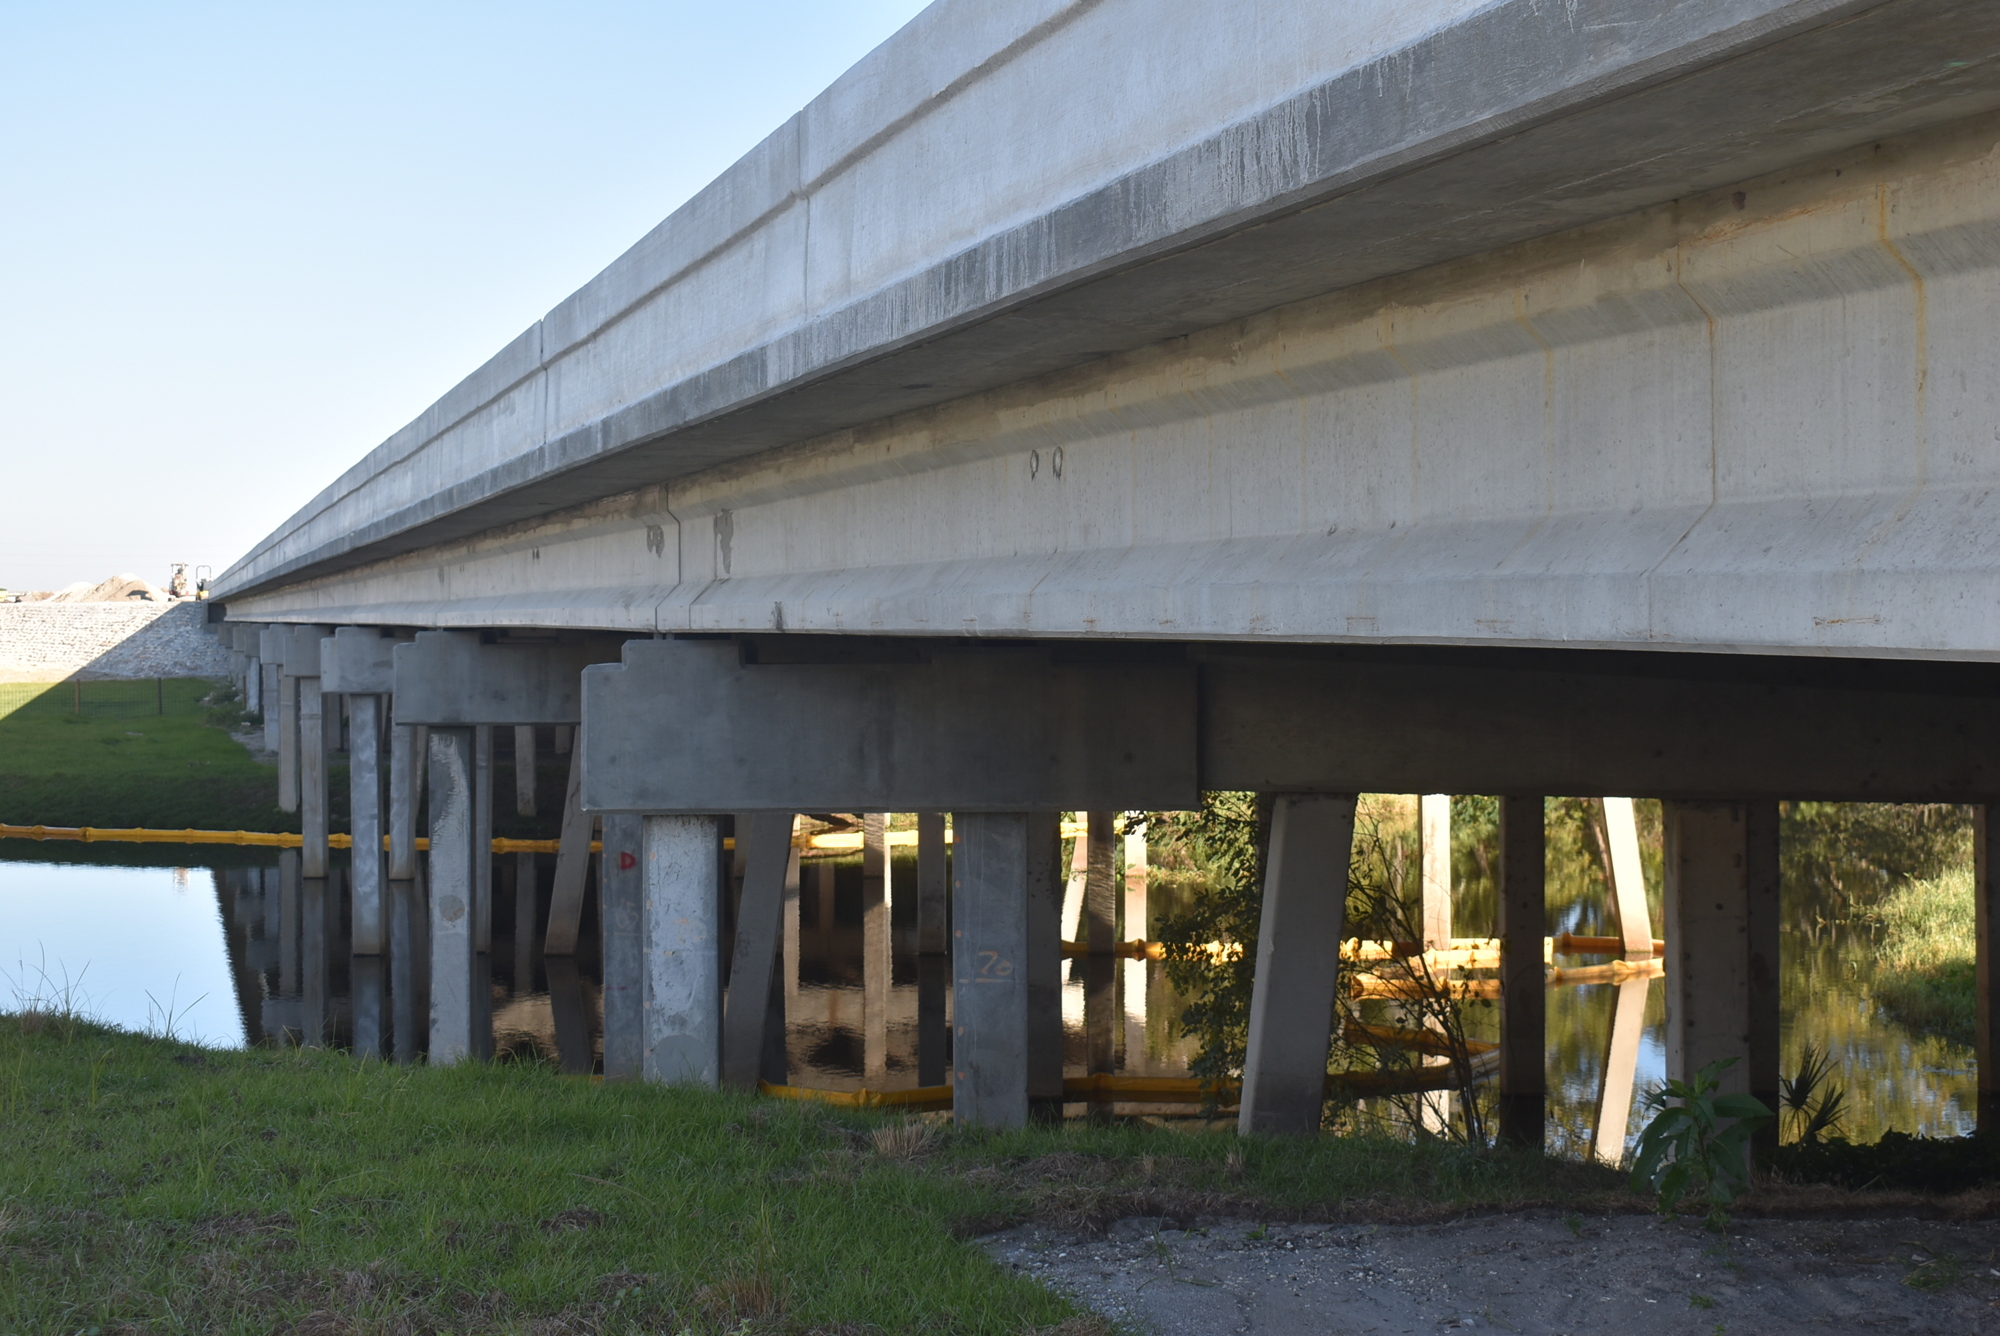 The new I-75 bridges over the Braden River have been widened to accommodate four lanes each once the current project is complete and five lanes each when I-75 is widened again in several years, possibly around 2030.